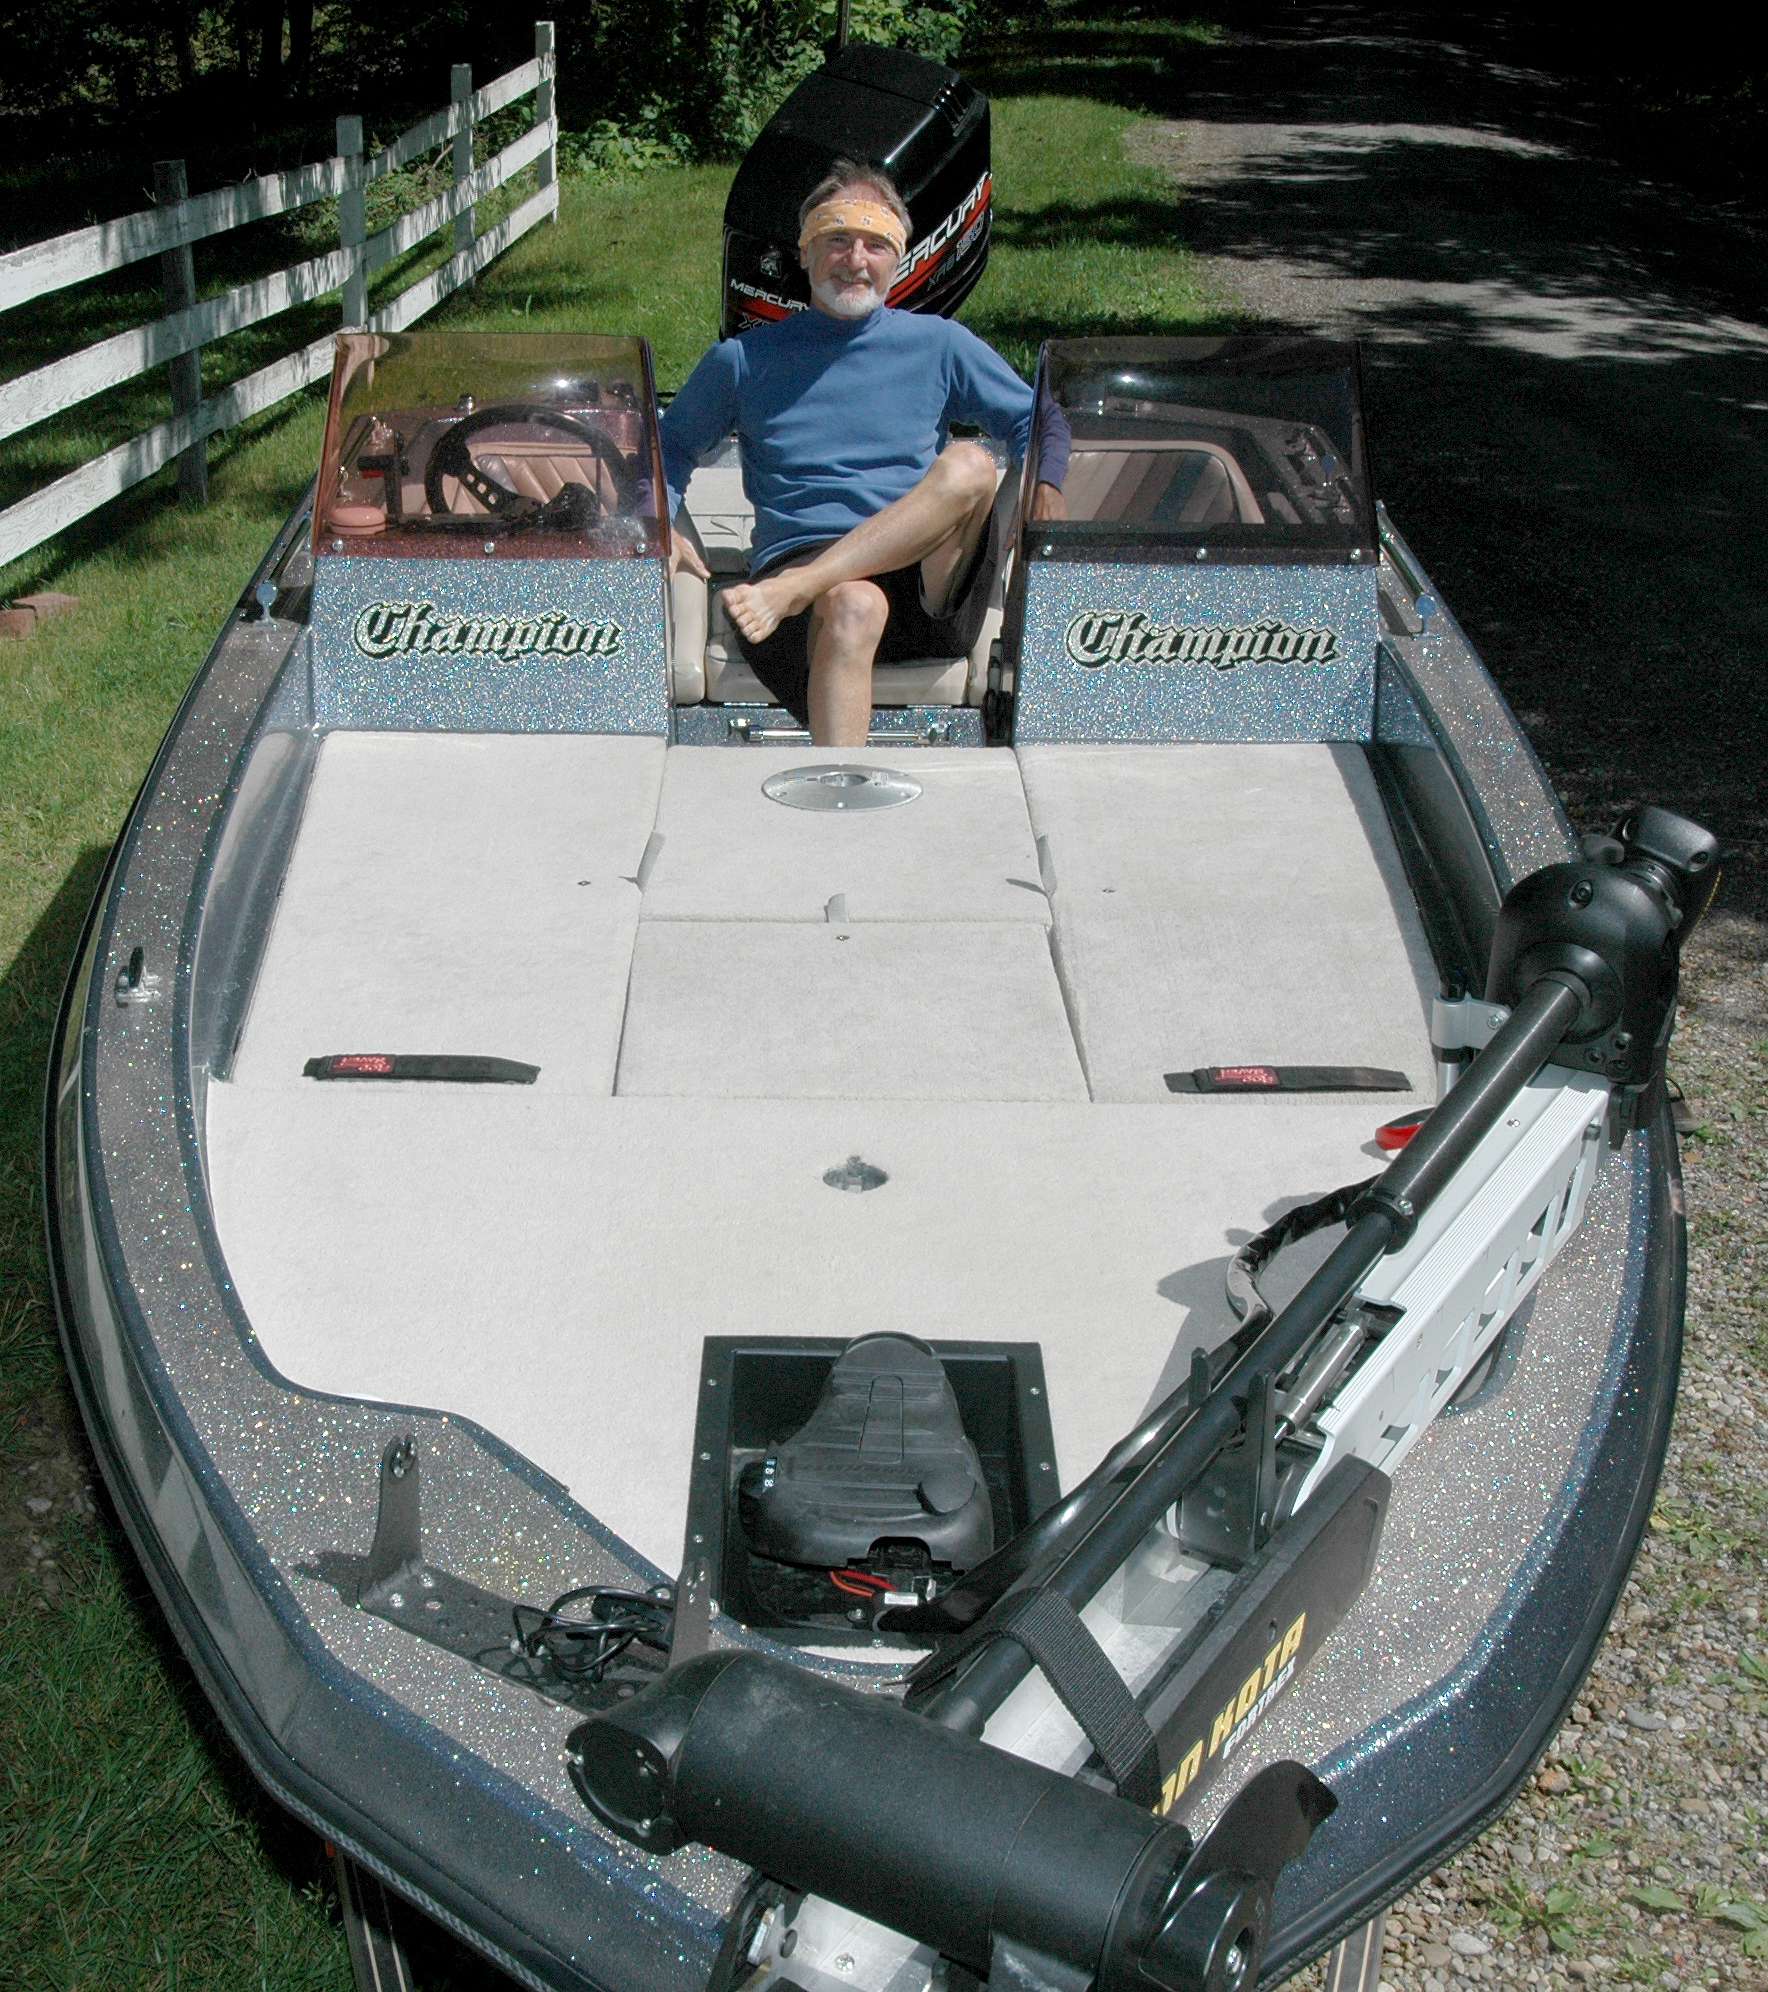 I pose in my bass boat after installing new marine-grade carpeting and recessed trolling motor pedal inset. I'm whipped but proud and happy.